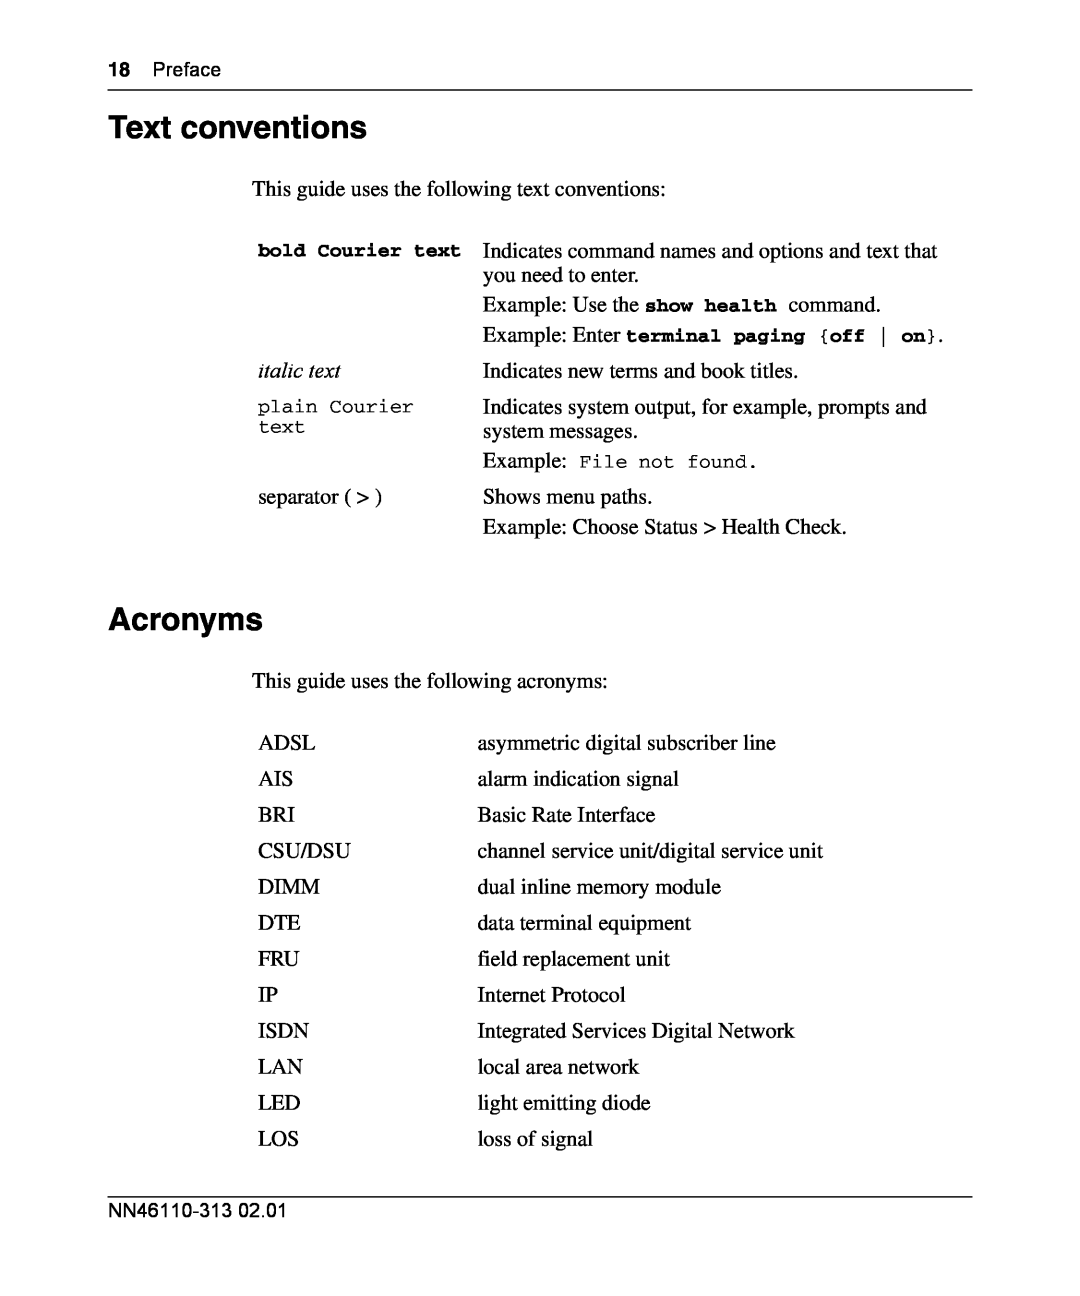 Nortel Networks 1050, 1100, 1010 manual Text conventions, Acronyms 